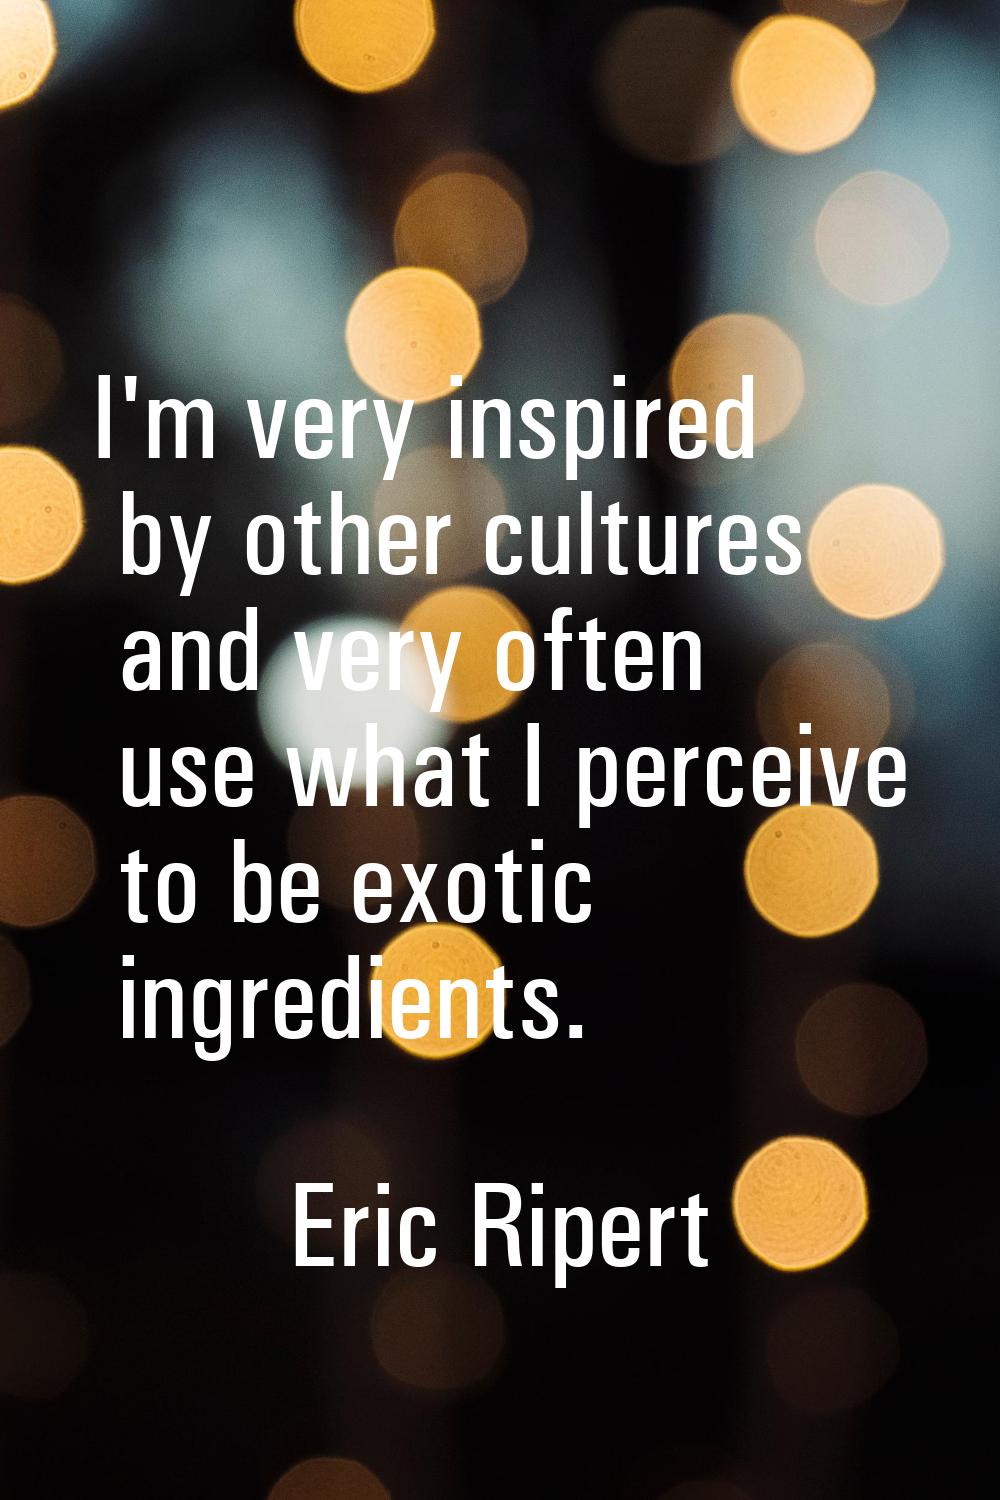 I'm very inspired by other cultures and very often use what I perceive to be exotic ingredients.